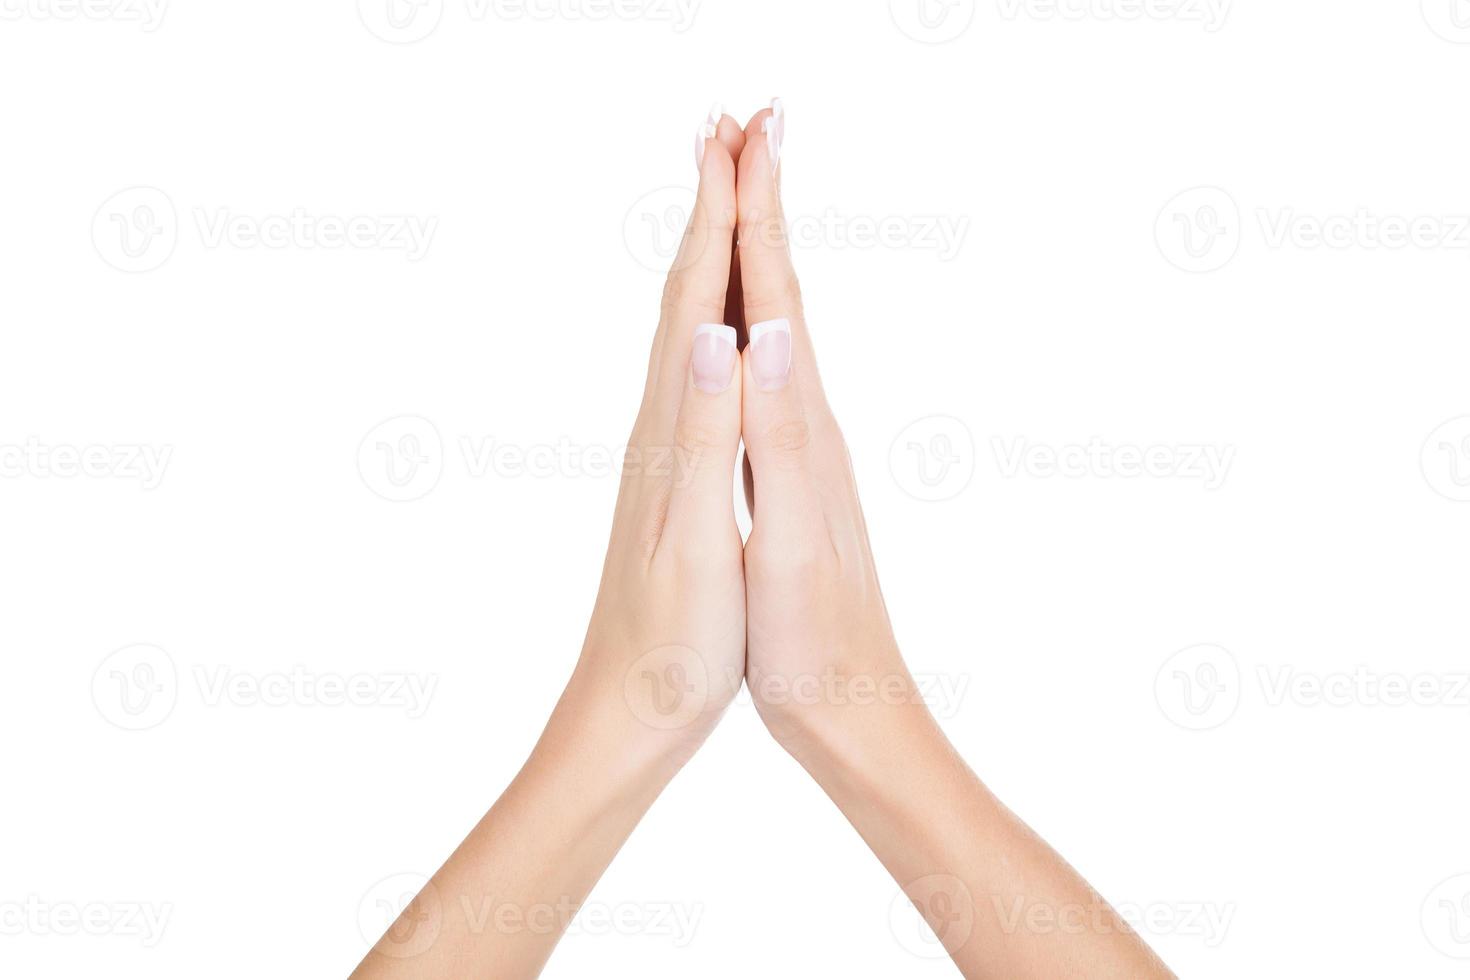 Hands gestures. Close-up of female hands gesturing while isolated on white background photo